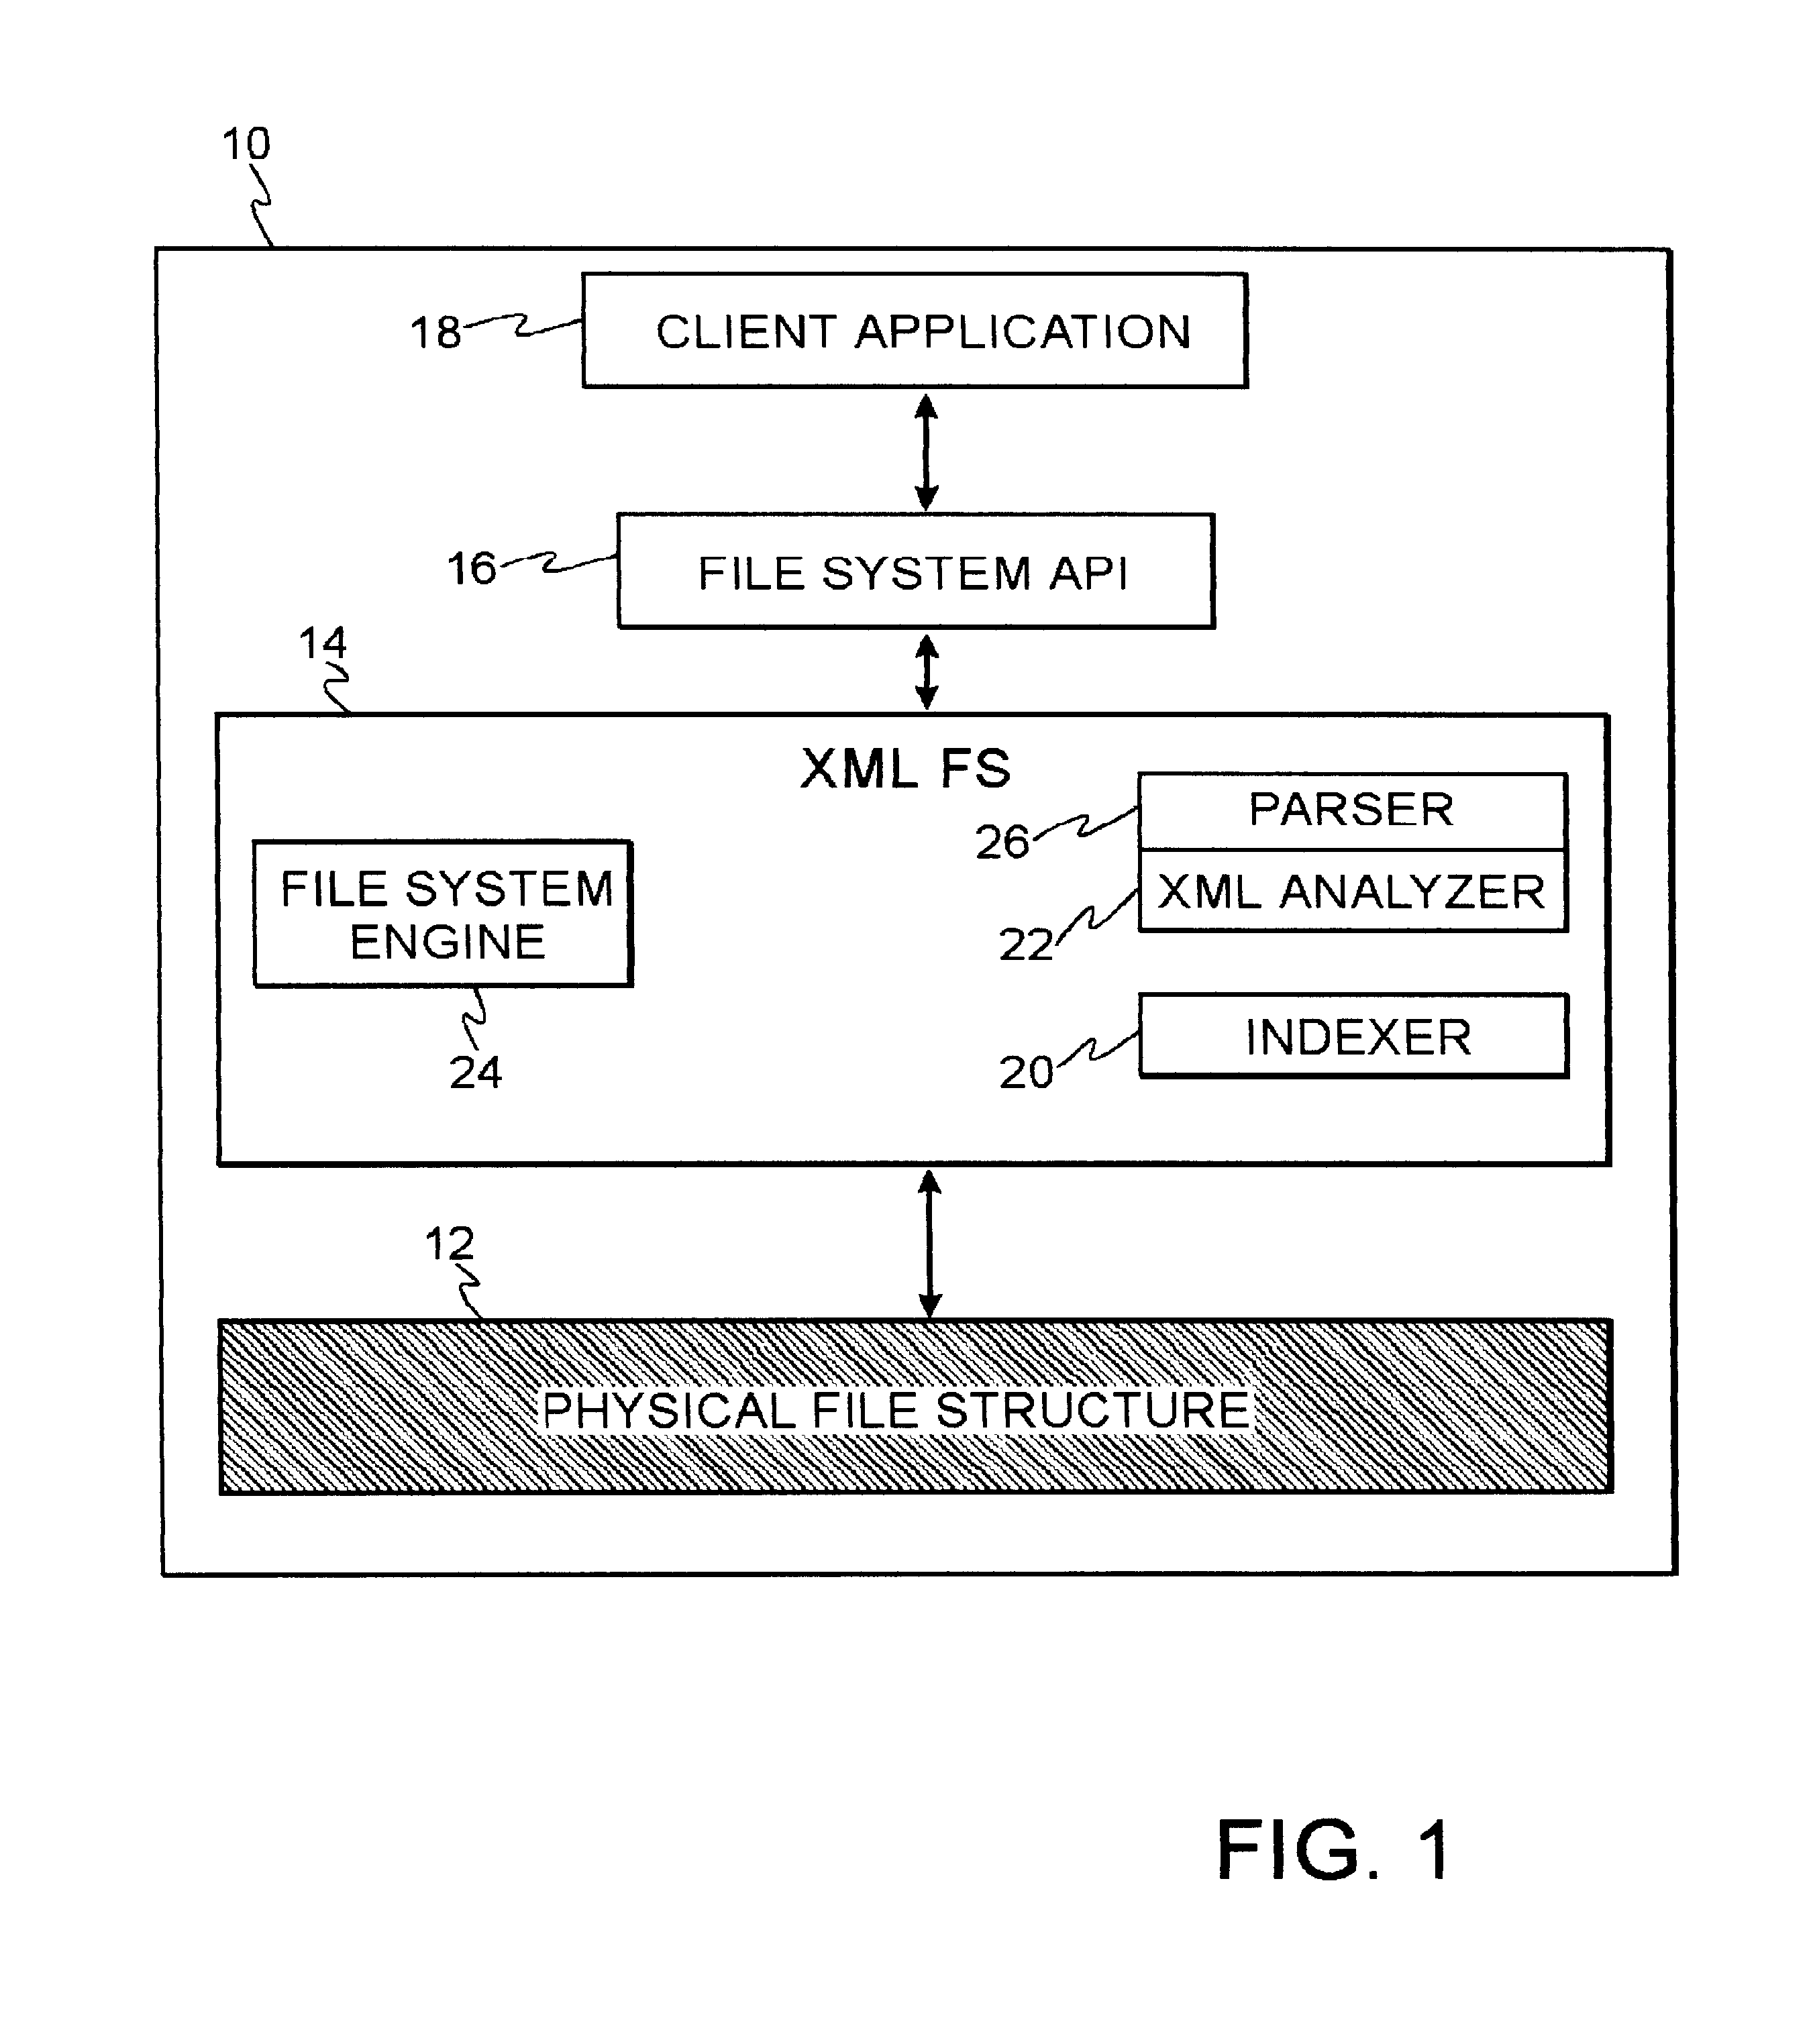 File system with access and retrieval of XML documents